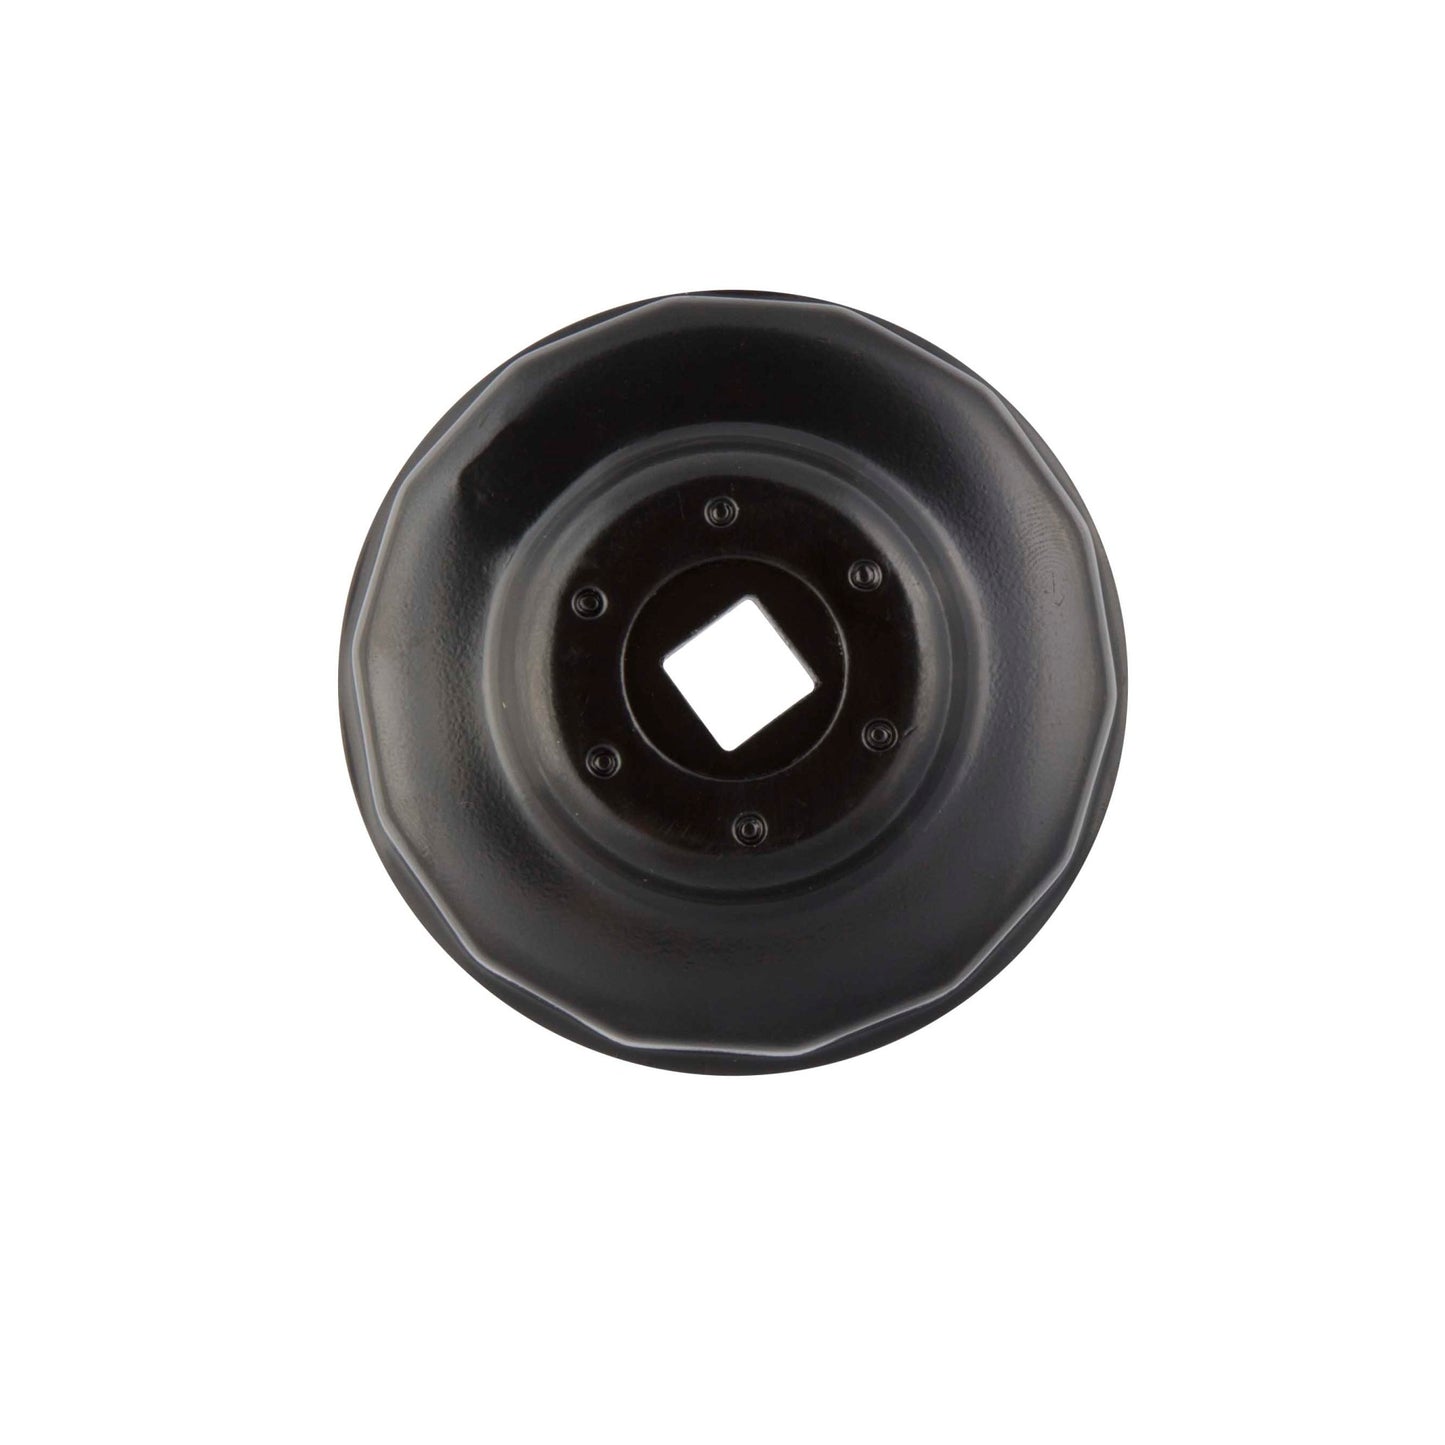 Oil Filter Cap Wrench 65mm and 67mm x 14 Flute